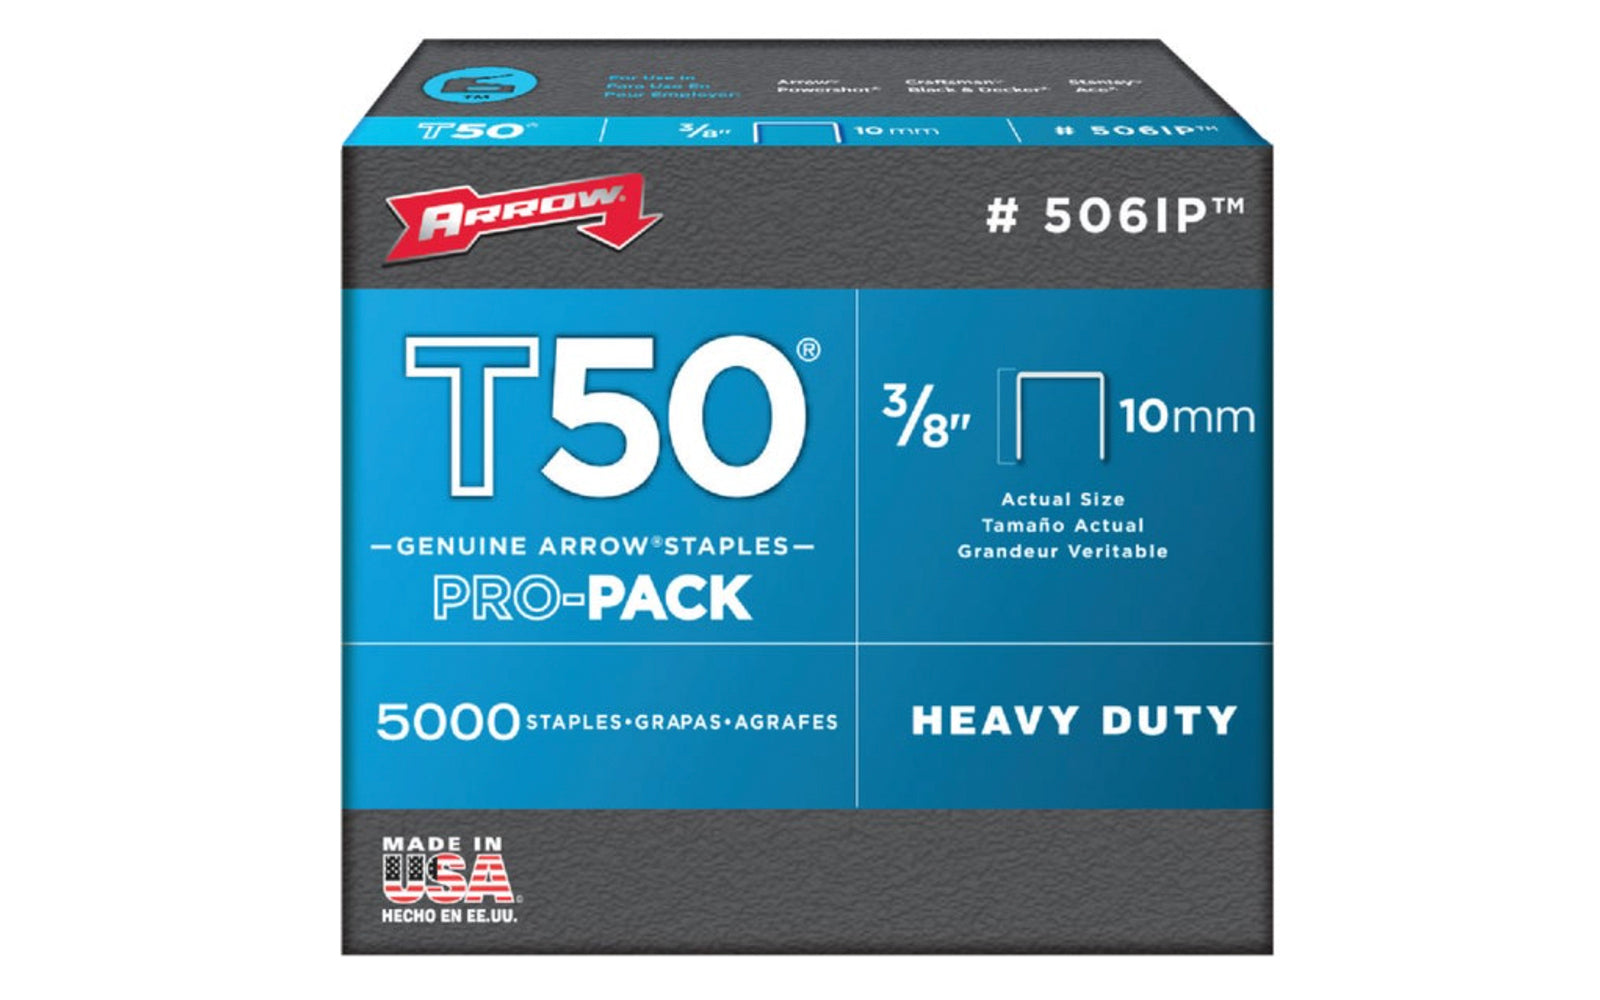 Arrow T50 Heavy Duty 3/8" Staples - 5000 PK. Model 506IP. Arrow Fastener T50 staples are the world’s best-selling heavy duty staple platform & have exceptional holding power. Used for all heavy duty stapling applications. Ideal for indoor applications. 3/8" (10 mm). Item No. 506IP. 5000 staples in pack. 079055510383